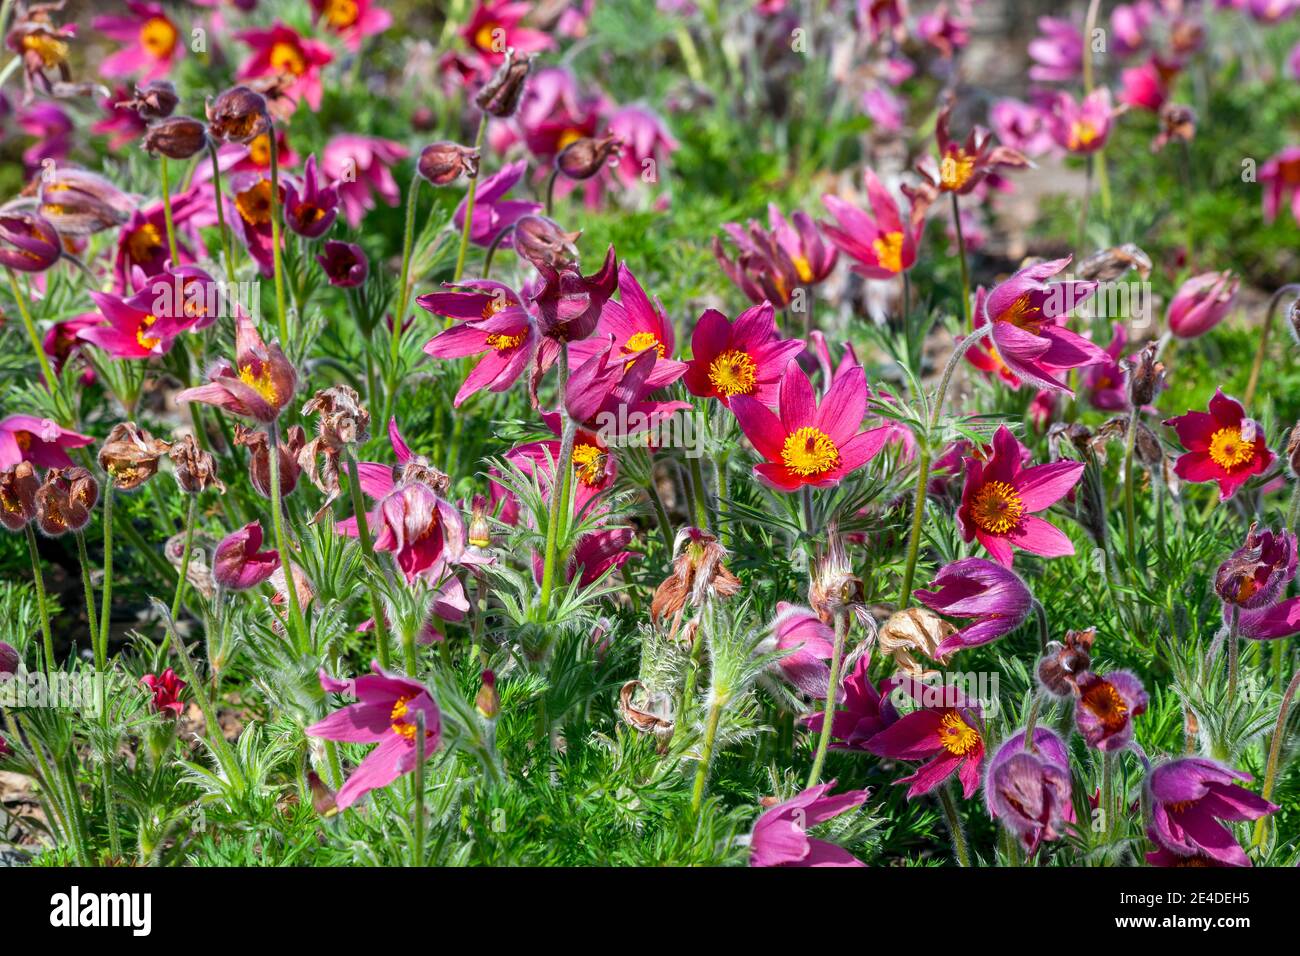 Pulsatilla vulgaris 'Rubra' a spring perennial red flowering plant commonly known as pasque flower, stock photo image Stock Photo